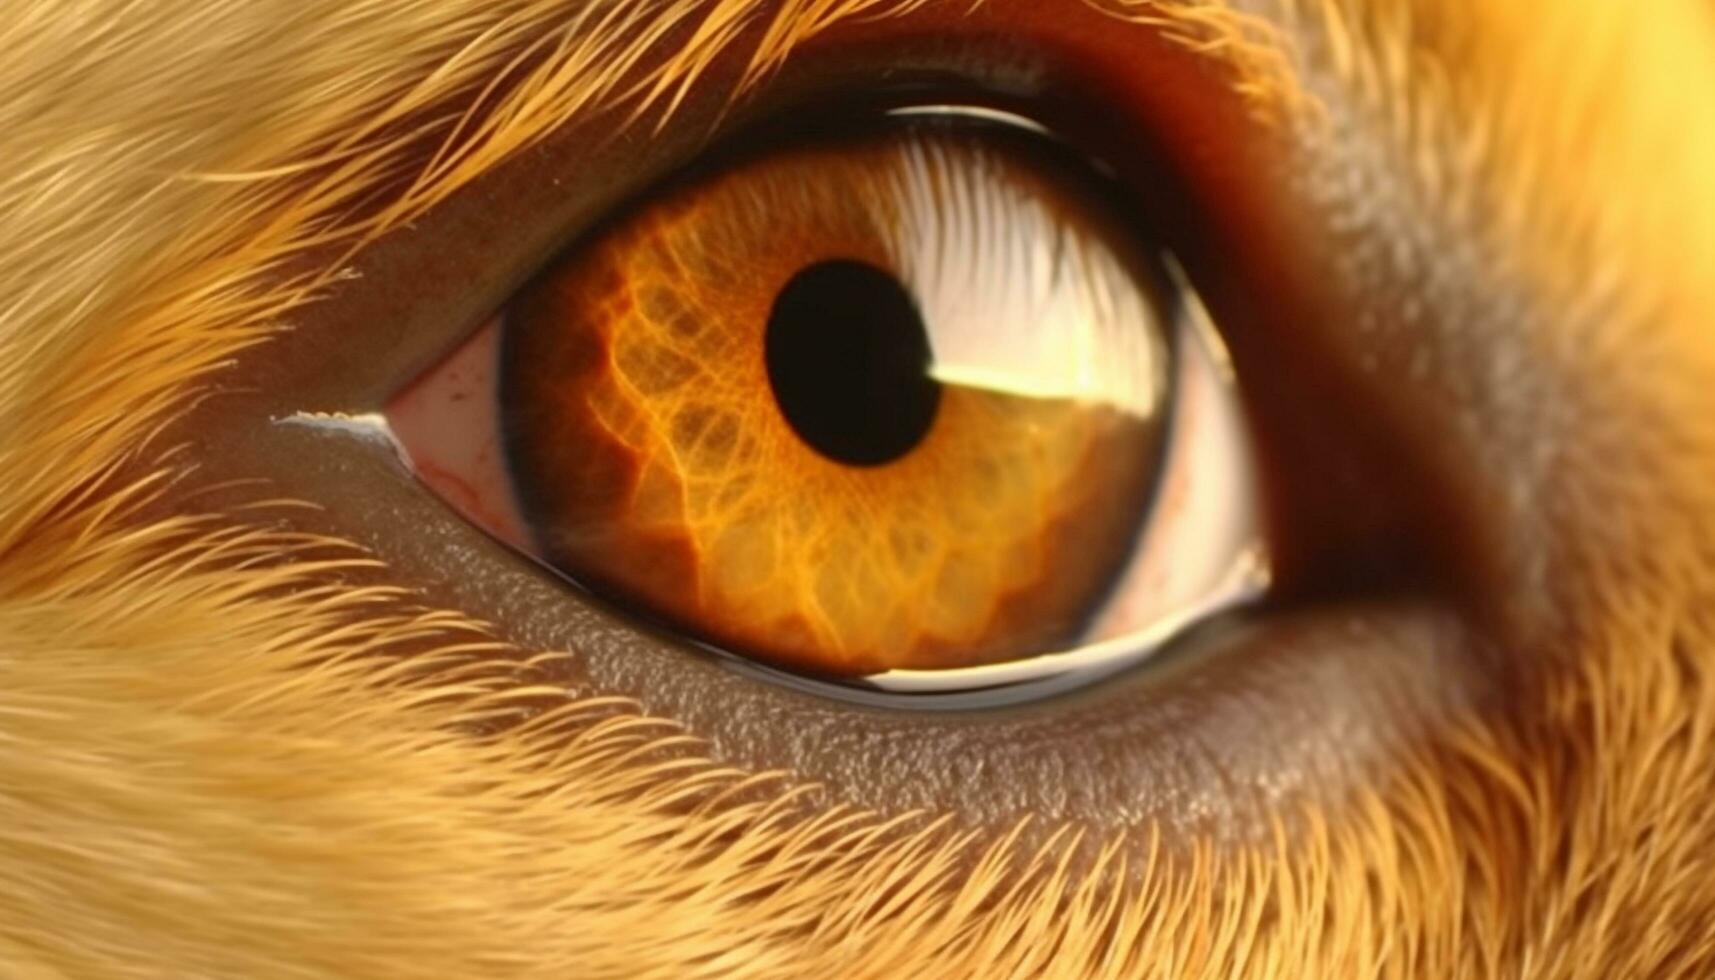 Animal eye staring, extreme close up, beauty in nature reflection generated by AI photo